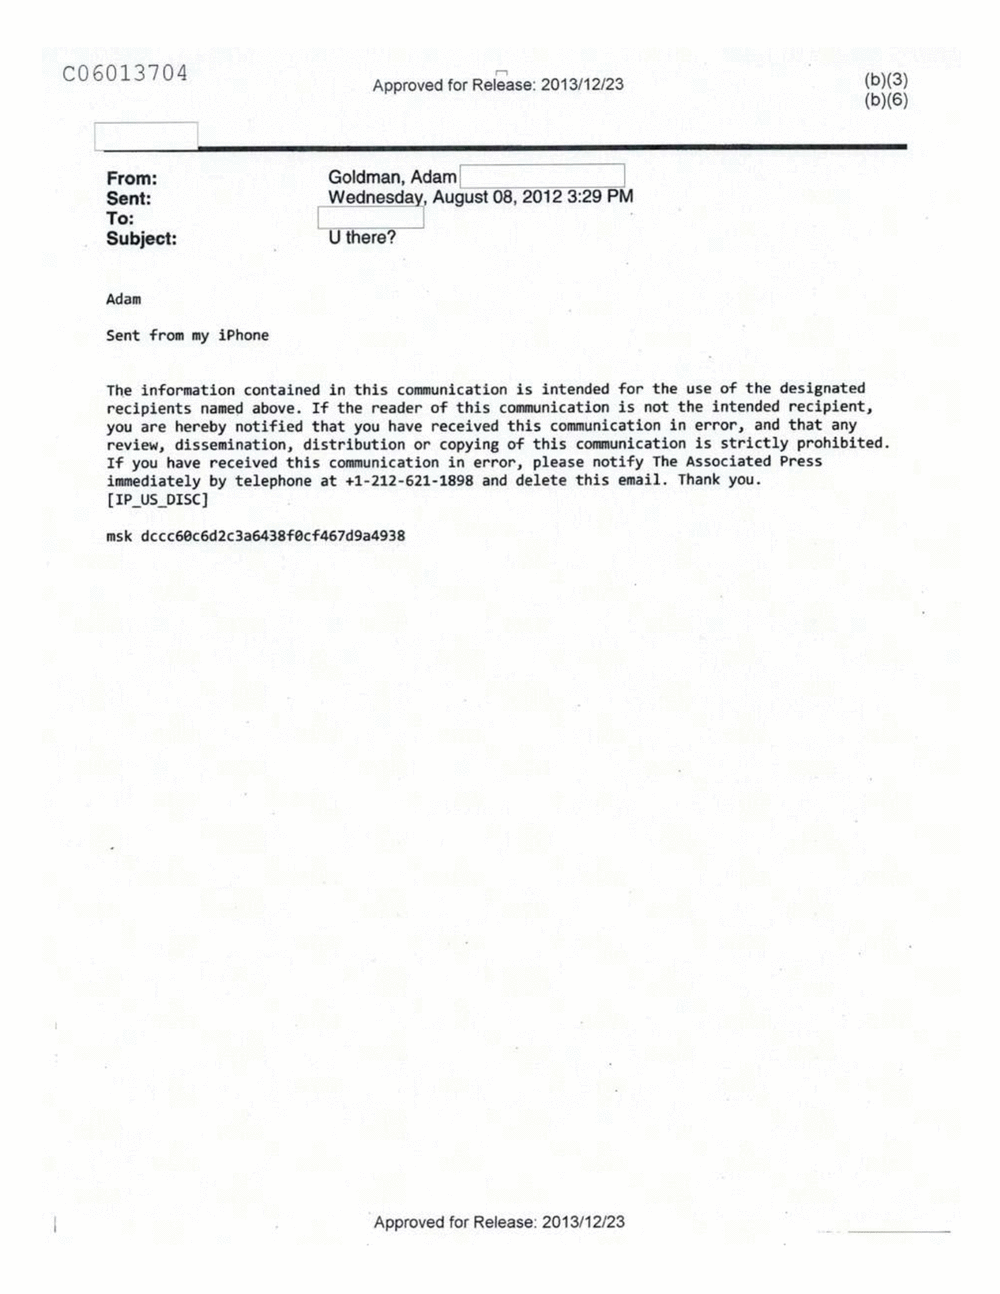 Page 564 from Email Correspondence Between Reporters and CIA Flacks